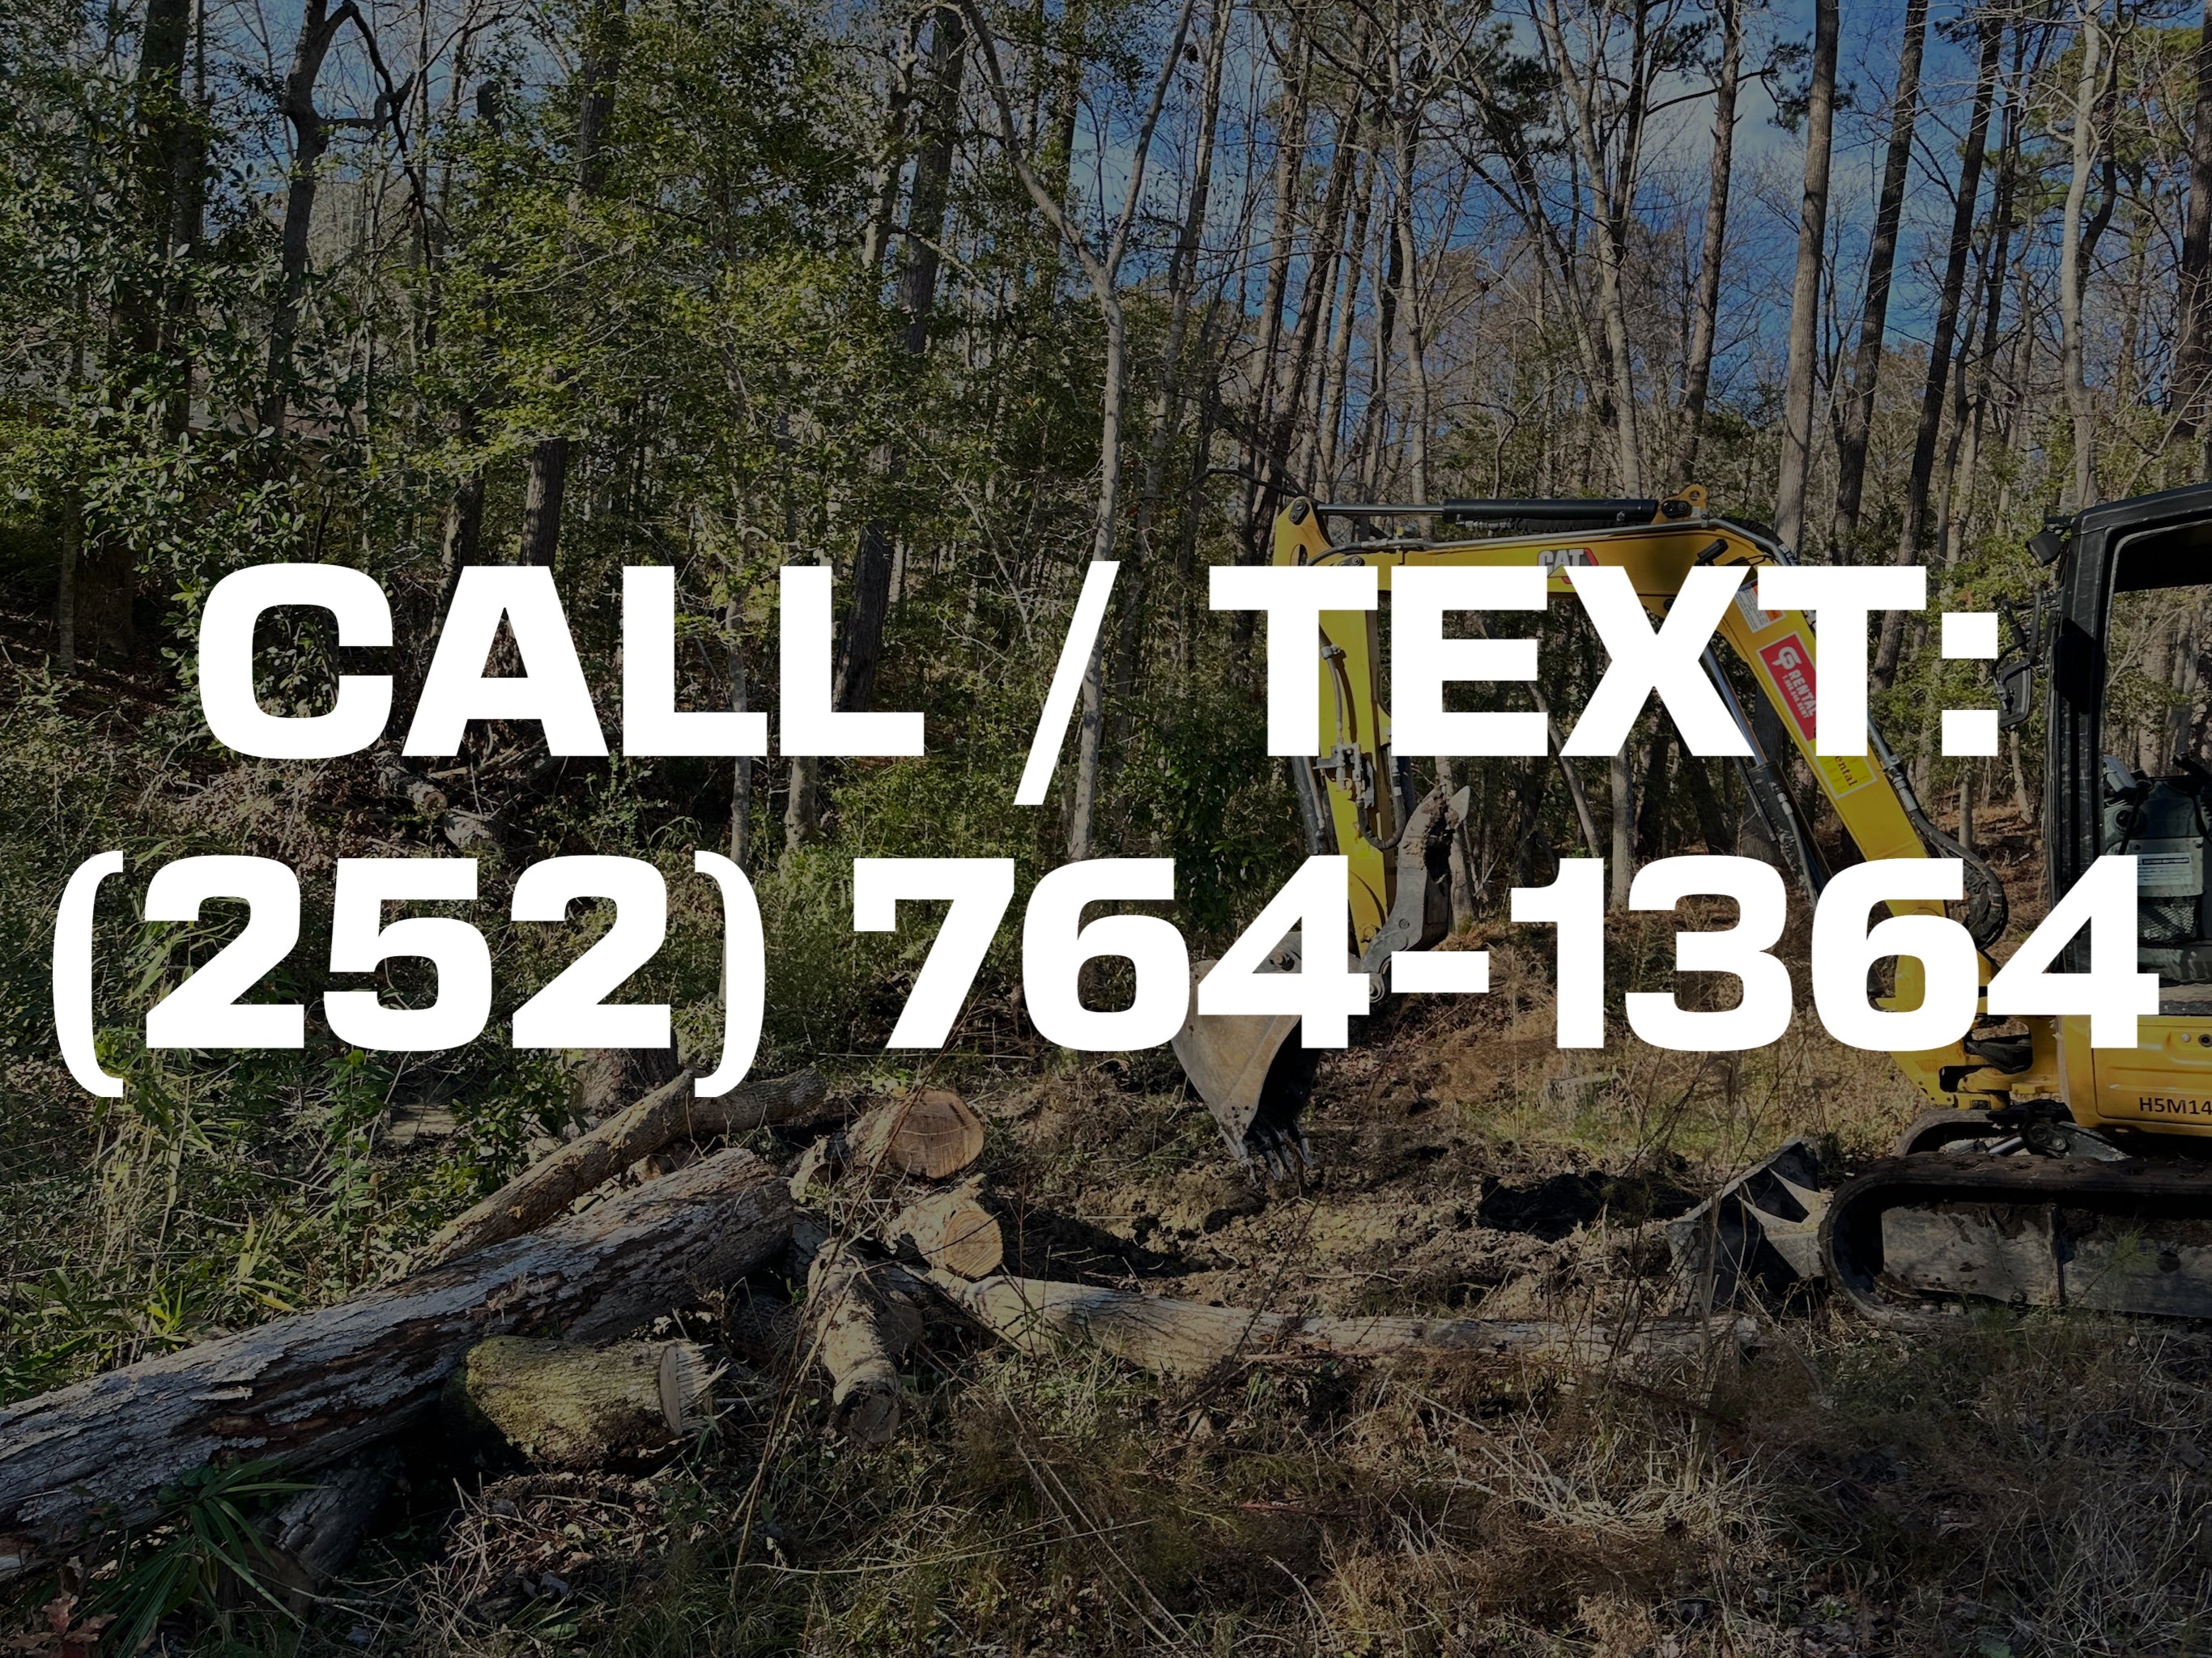 CONTACT CAROLINA EARTHWERX BY CALL OR TEXT TO 252-764-1364 FOR A FREE ESTIMATE ON YOUR NEXT PROJECT!